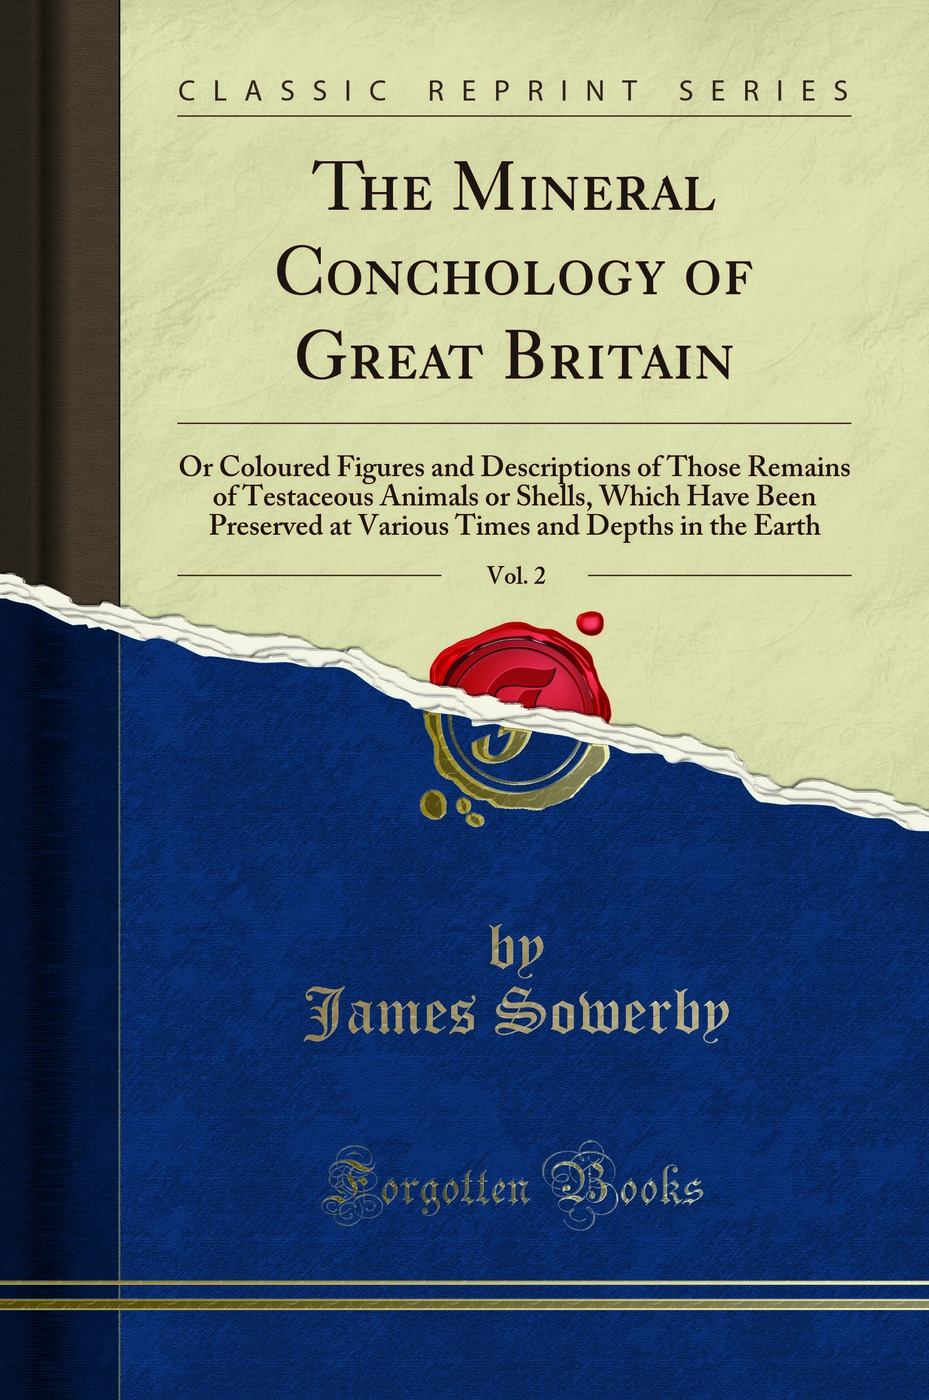 The Mineral Conchology of Great Britain, Vol. 2 (Classic Reprint) - James Sowerby